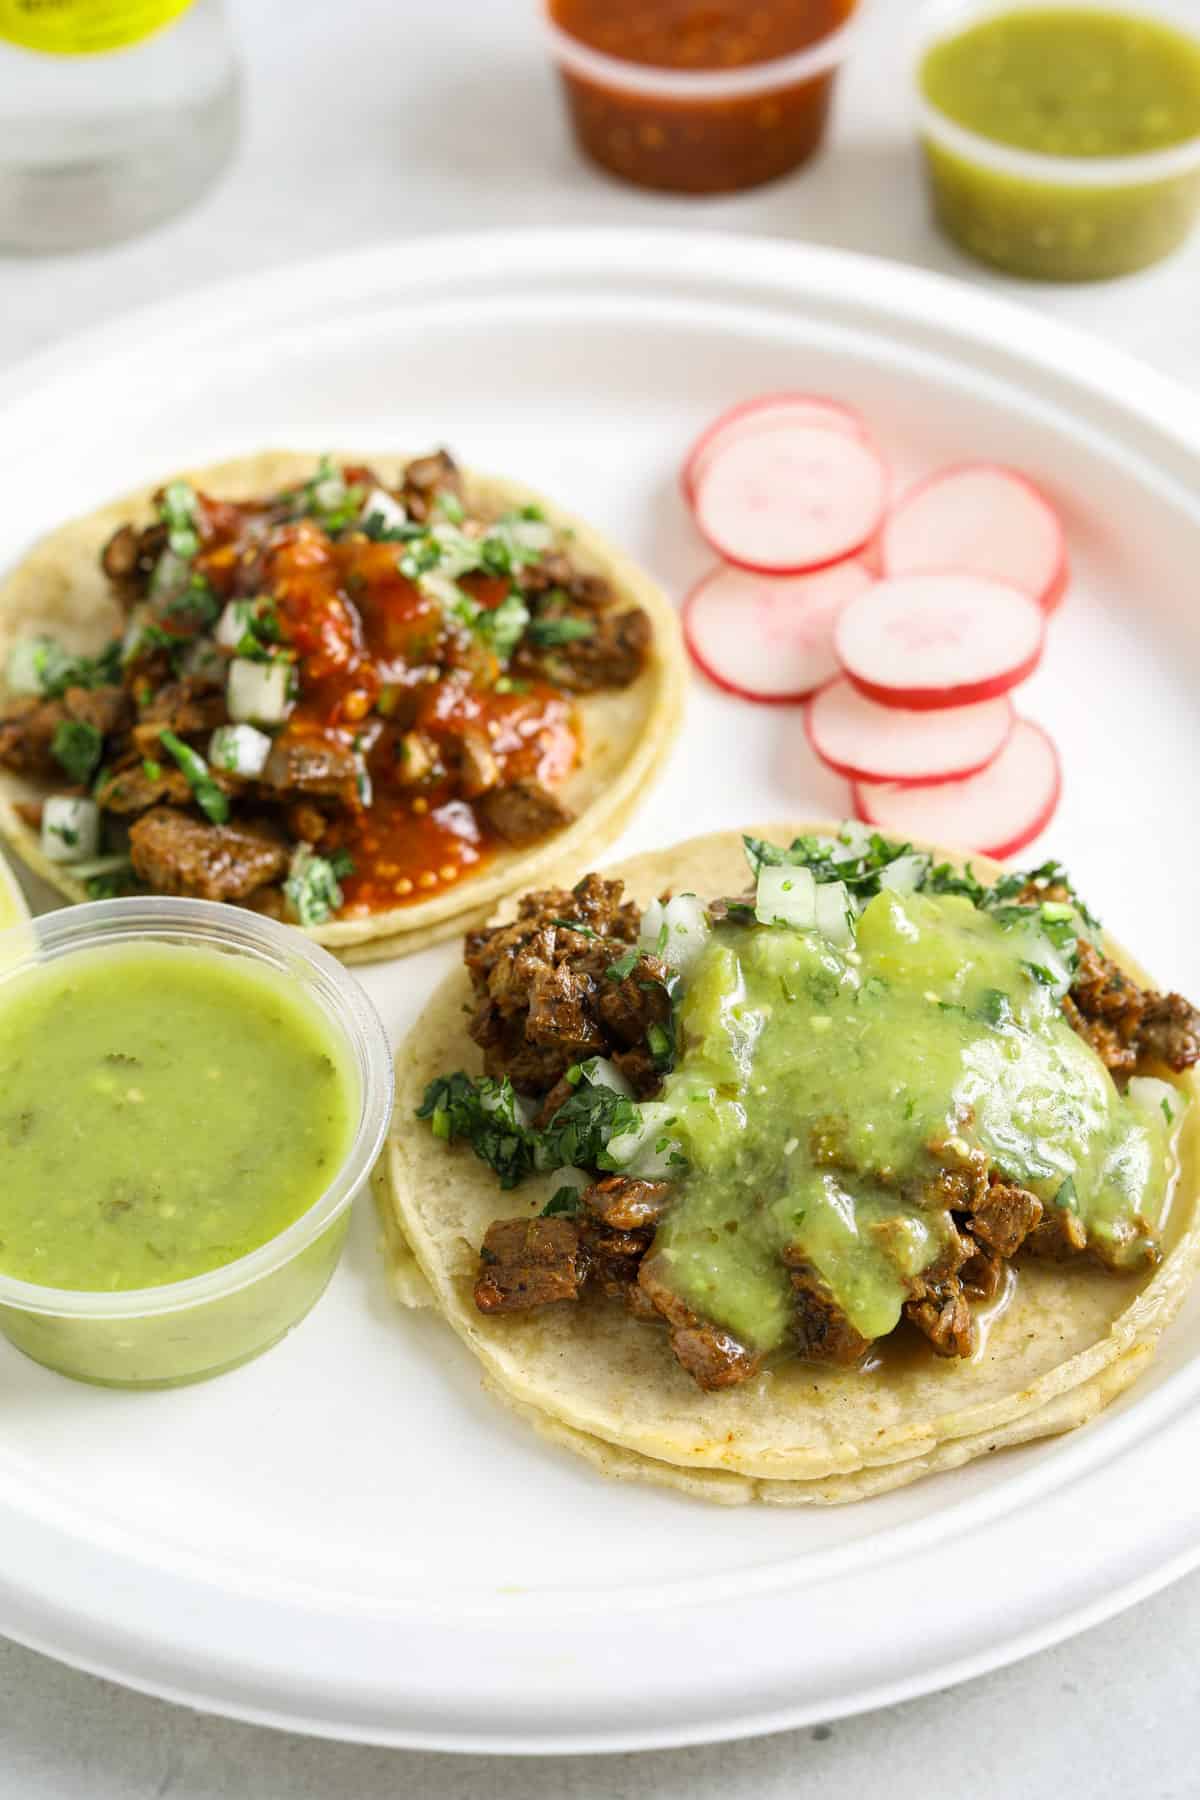 A paper plate filled with two tacos, sliced radish and a small cup of salsa verde.